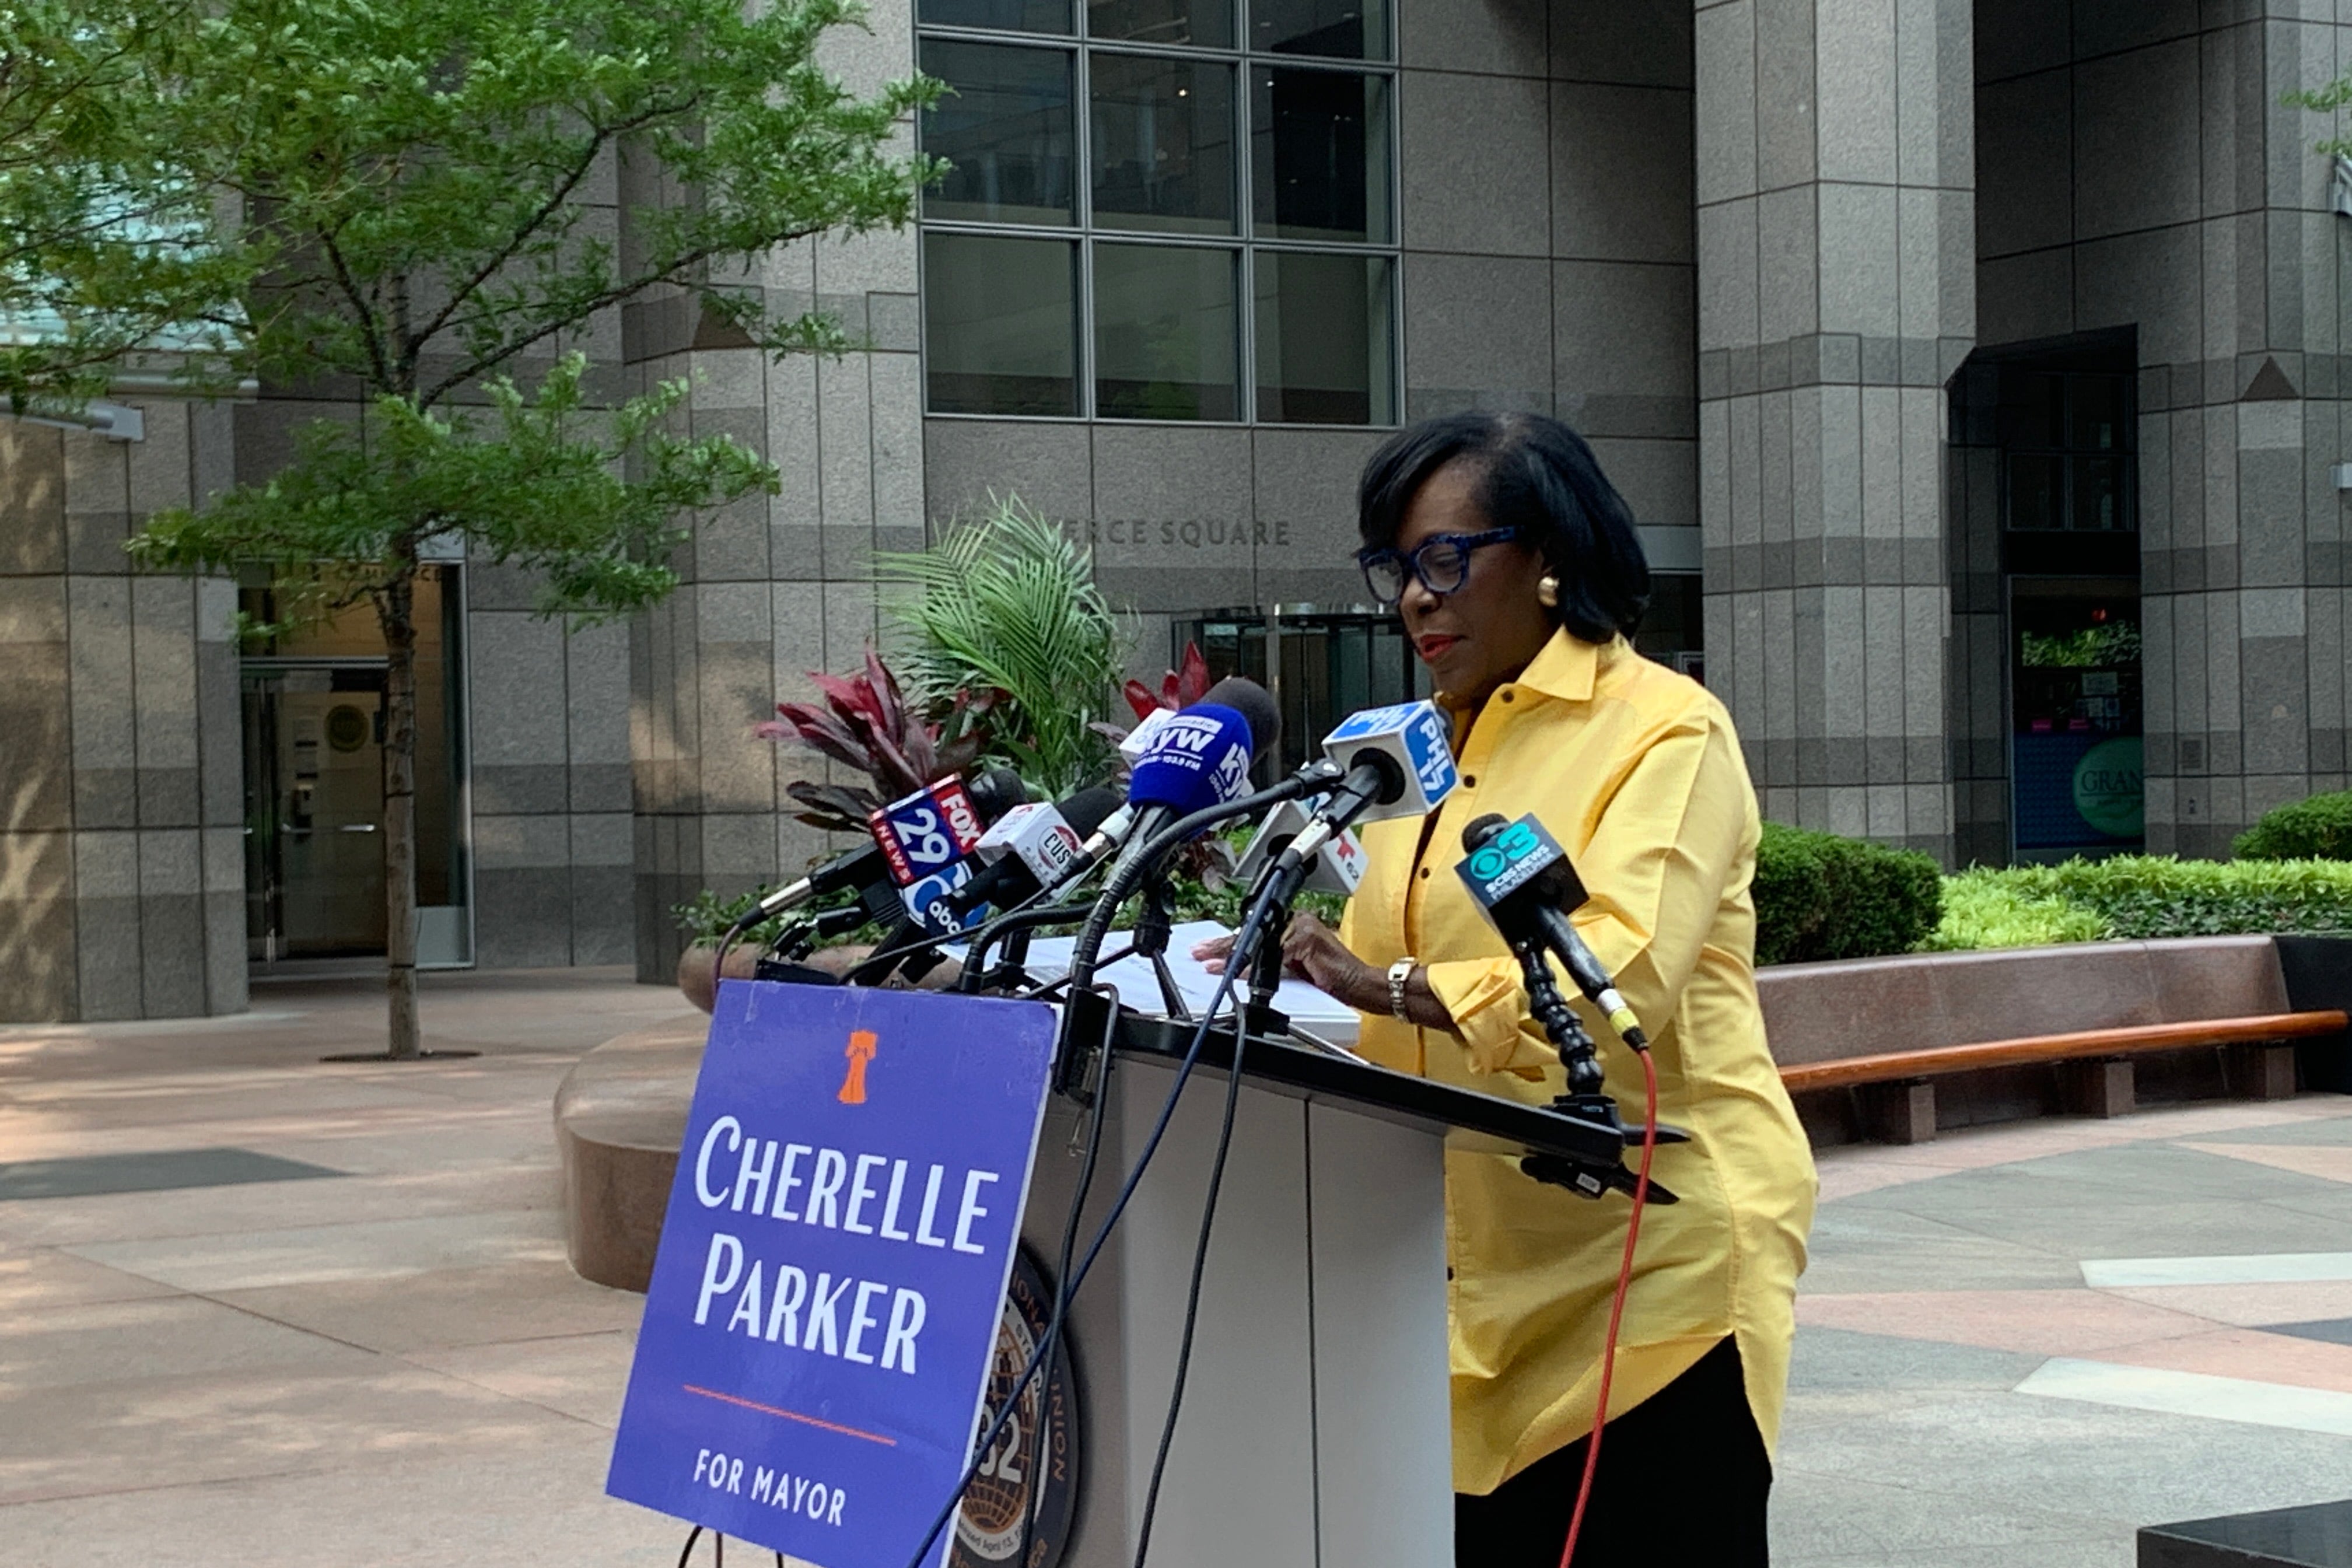 A woman in a yellow shirt and black pants speaks at a podium.